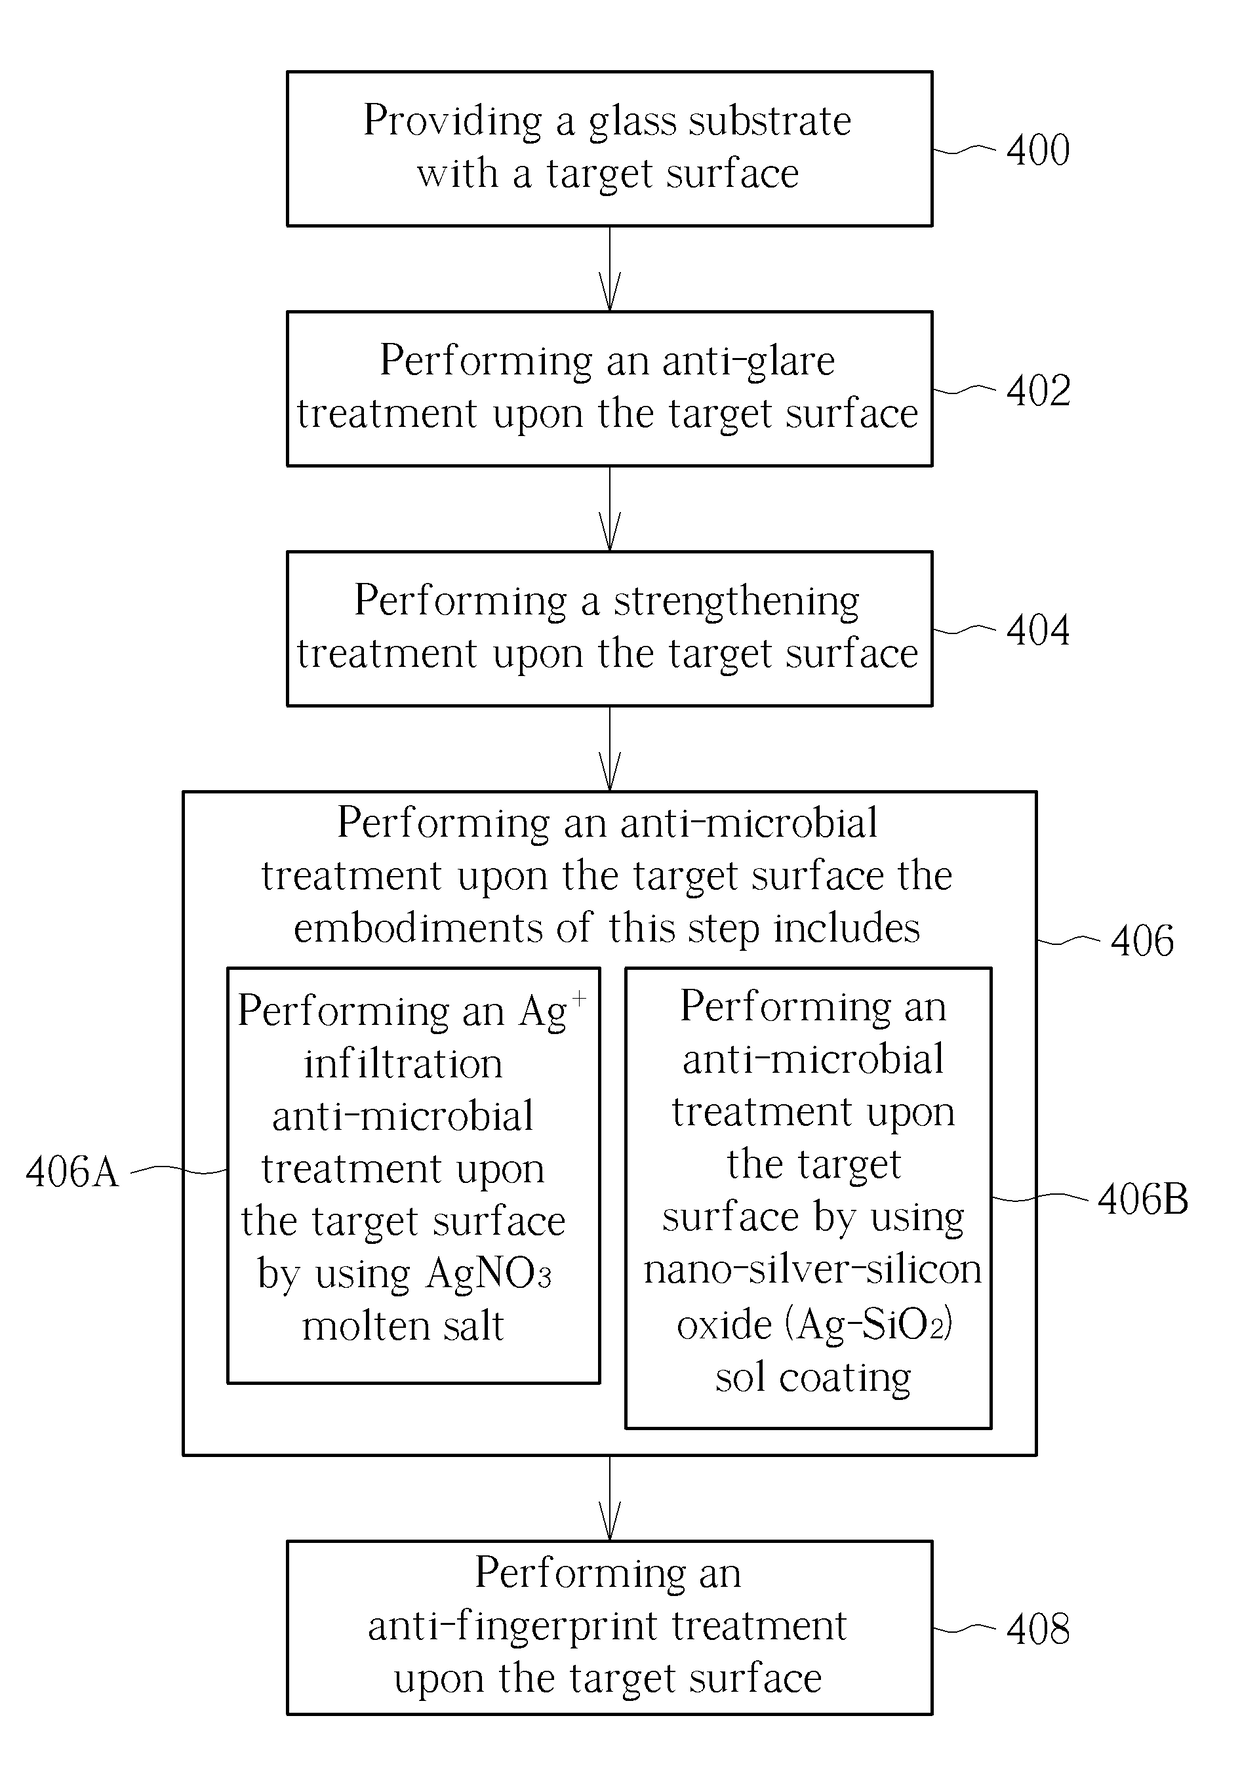 Method of fabricating an Anti-glare, strengthened, Anti-microbial and antifingerprint strengthened glass